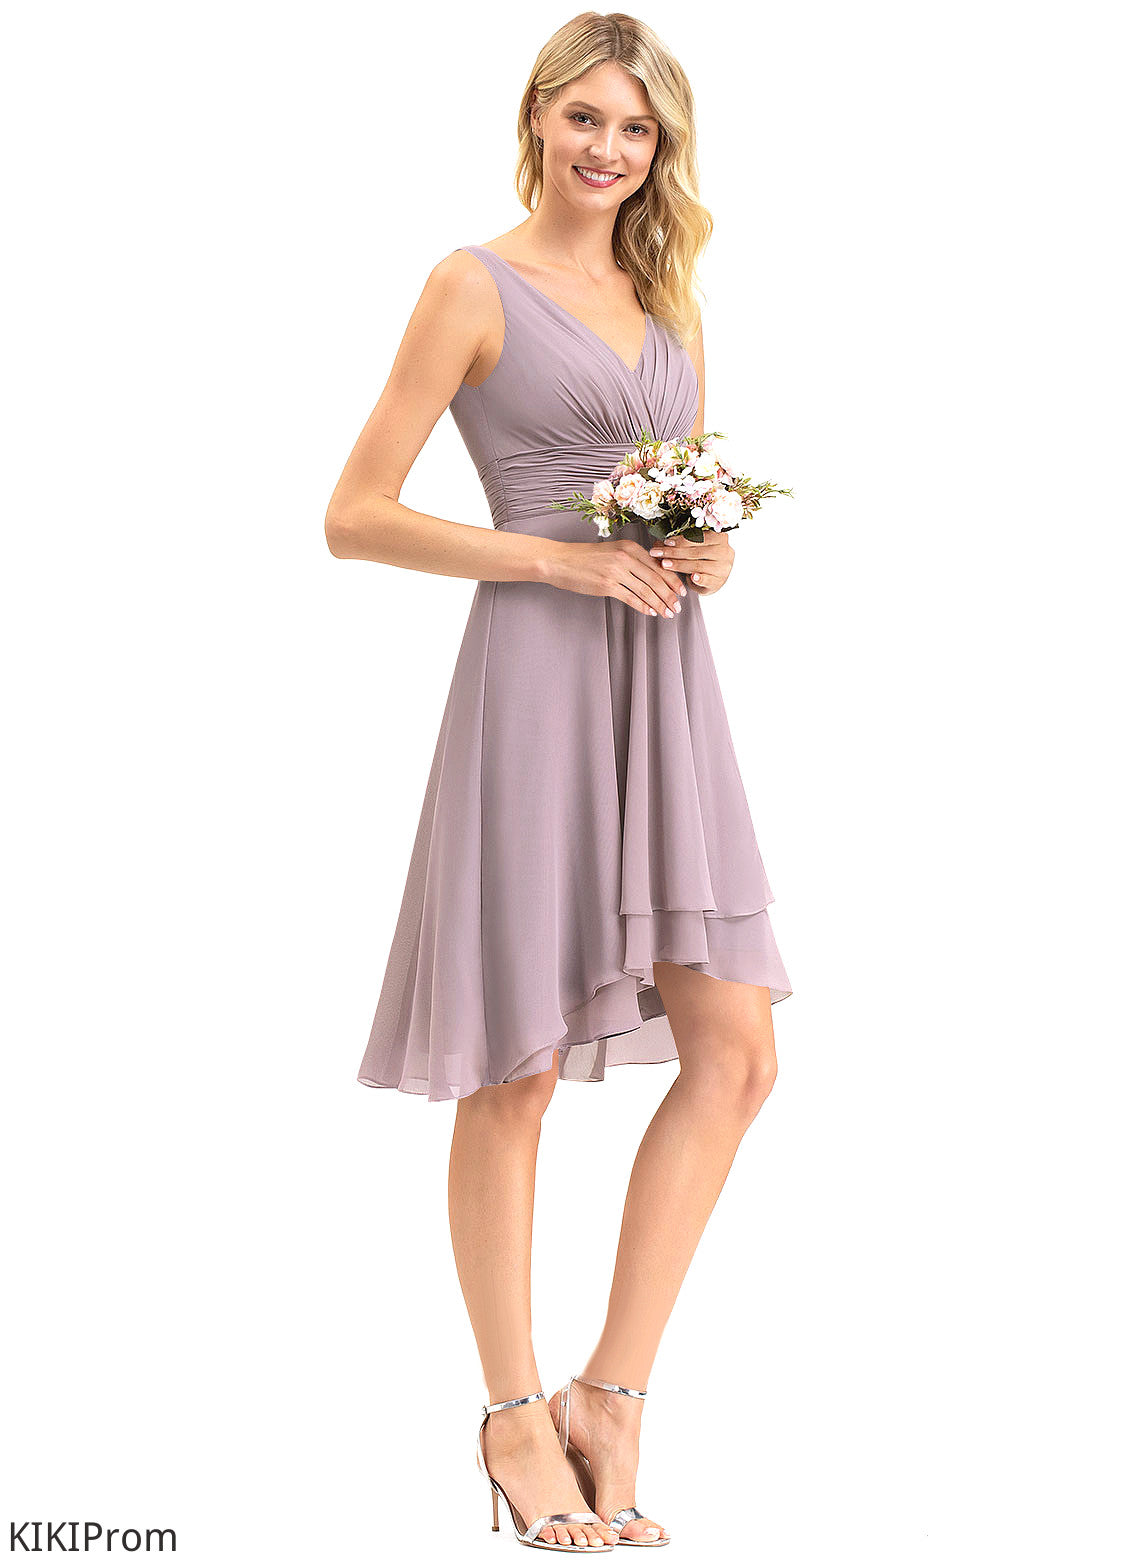 Ruffle With V-neck Cocktail Chiffon A-Line Nathalie Dress Asymmetrical Cocktail Dresses